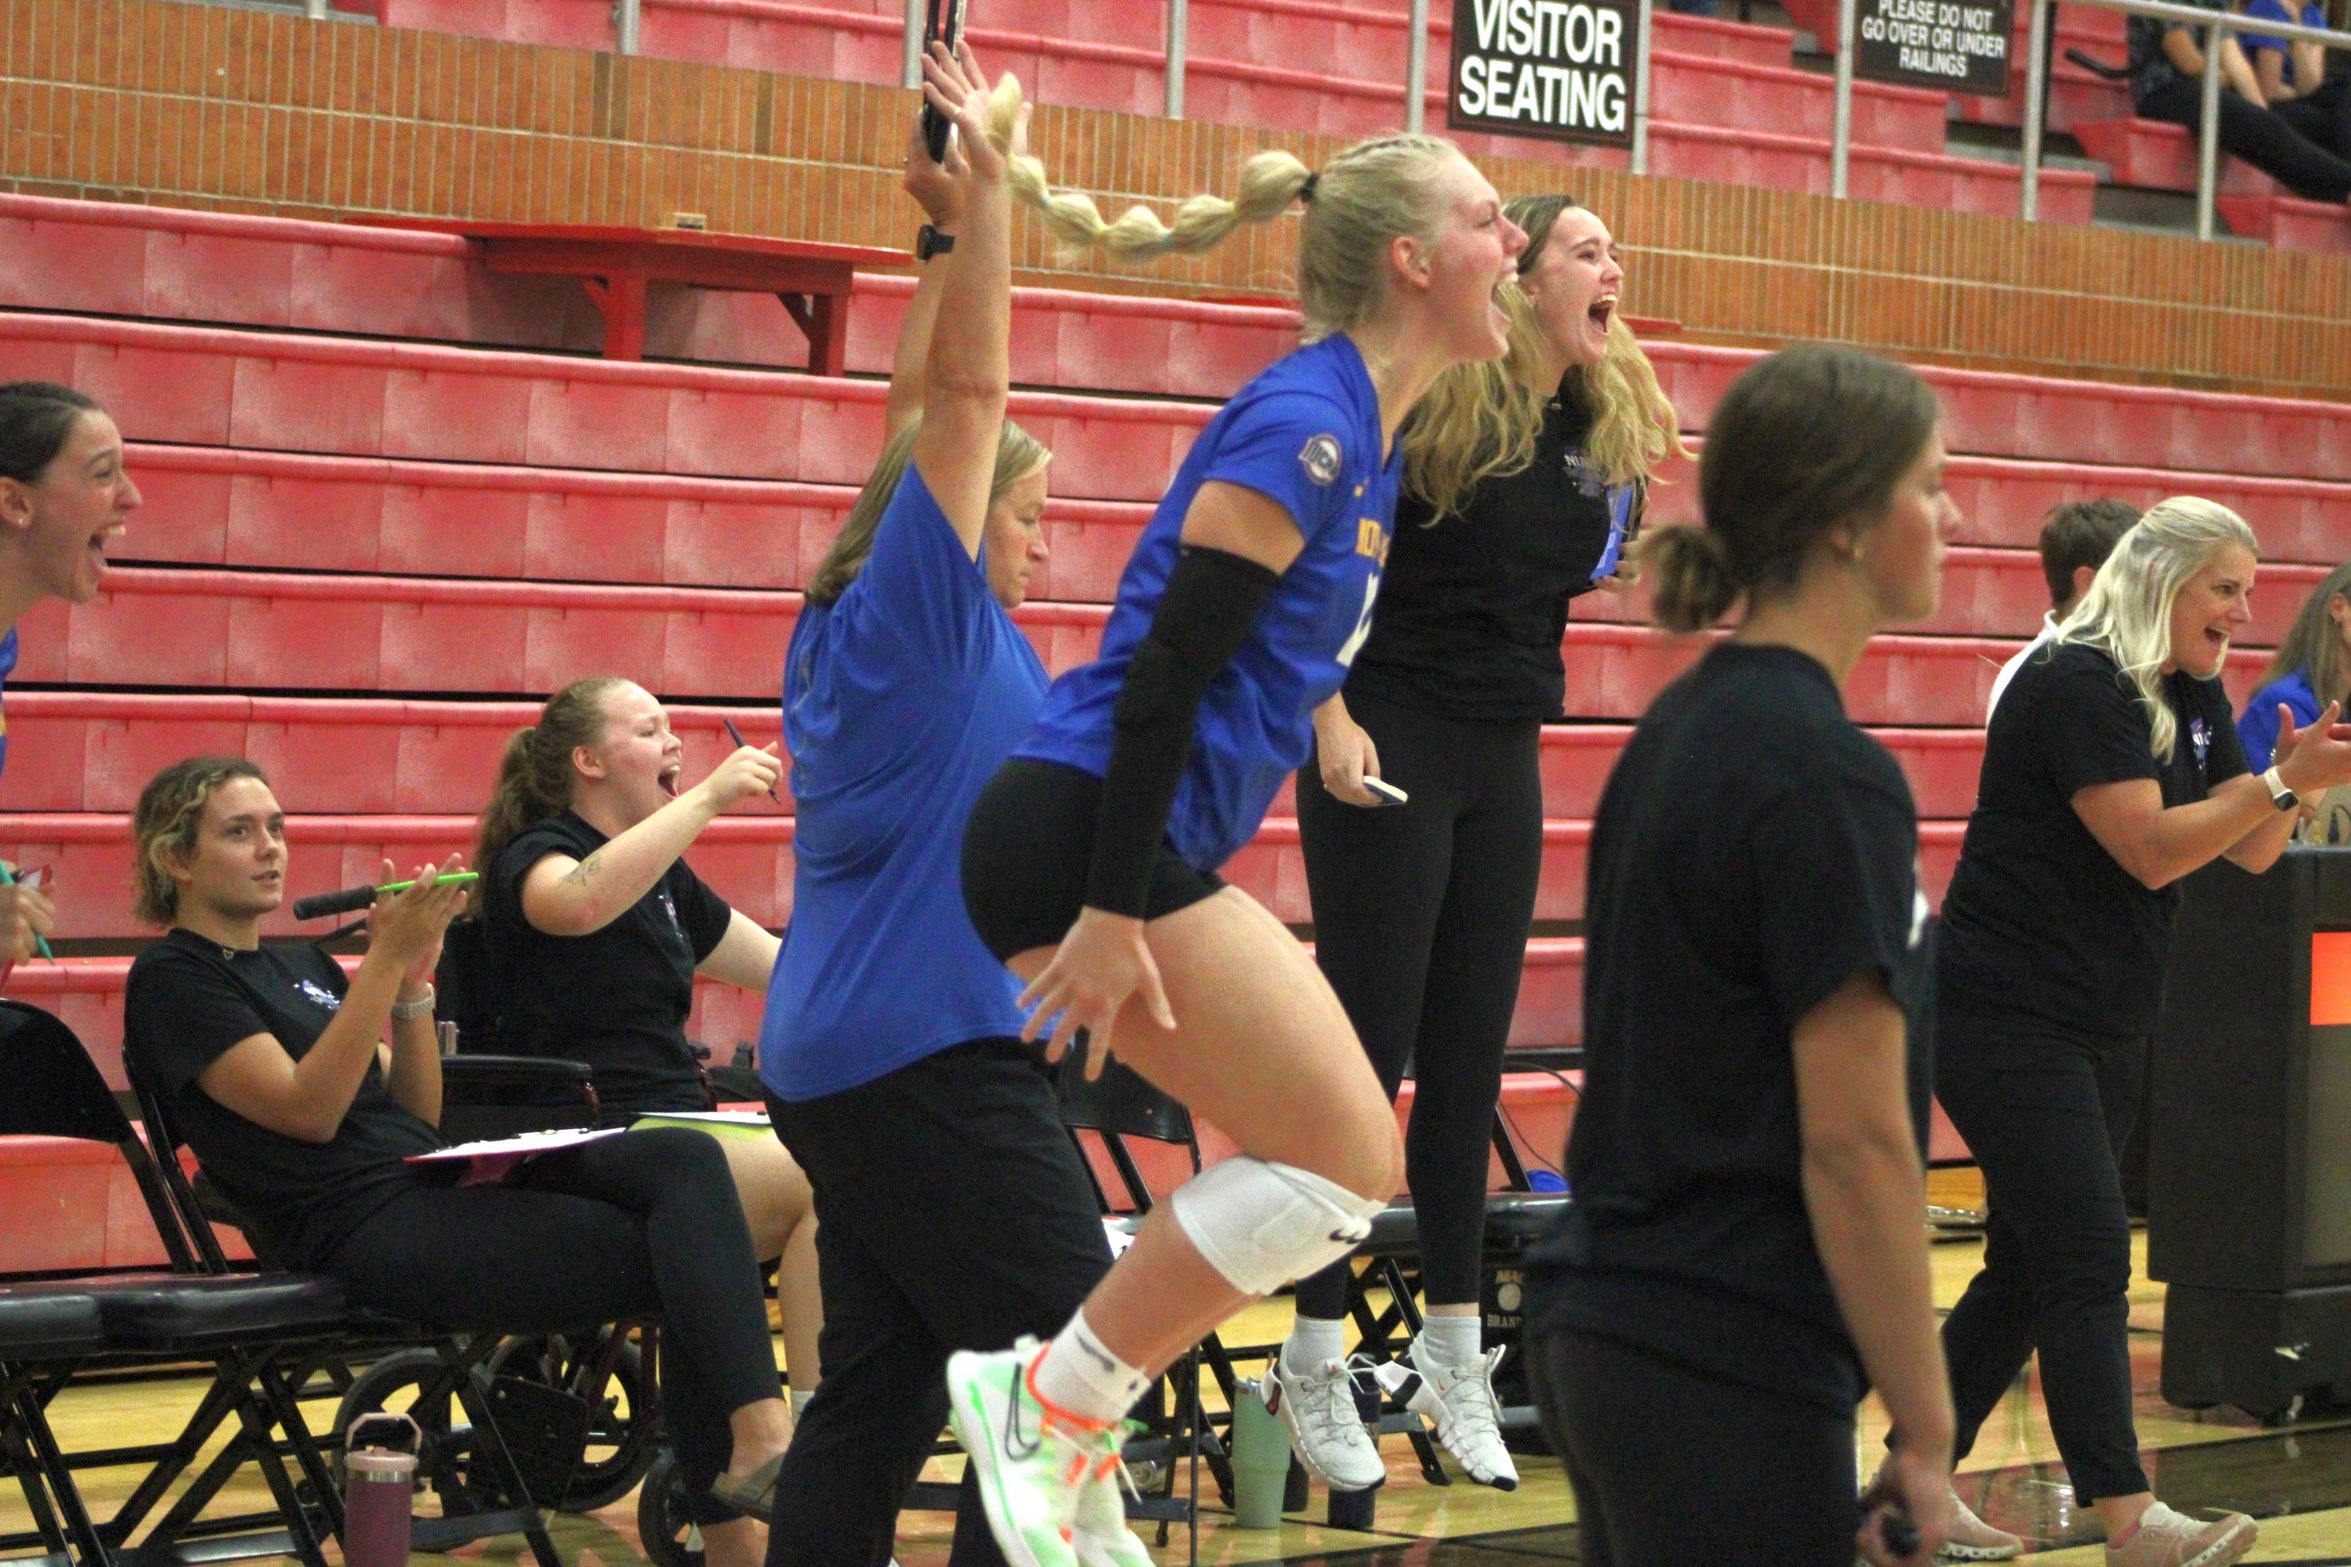 The NIACC bench celebrates a set four win in Friday's match against the Wartburg College Junior Varsity in the NIACC gym. The Trojans won, 3-2.